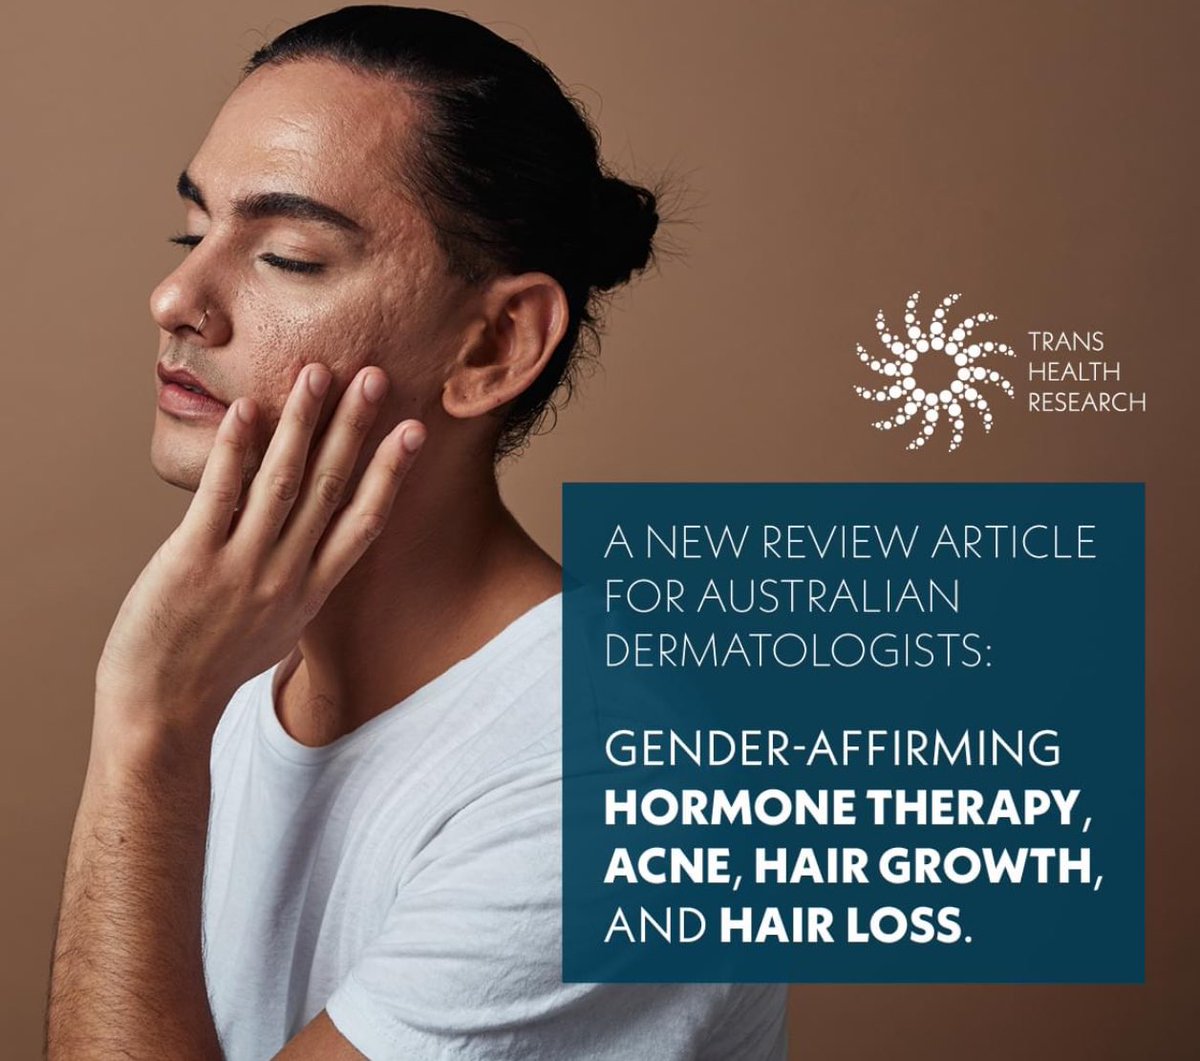 🥁 Our latest review: #trans101 & #transhealth for #dermatologists 😊 We discuss latest #transresearch on effects of #HRT #GAHT on #acne, skin, #hair growth & loss. Plus, skin/hair with gender-affirming surgeries. 👉 doi.org/10.1111/ajd.14… #transgender #dermatology @UniMelbMDHS